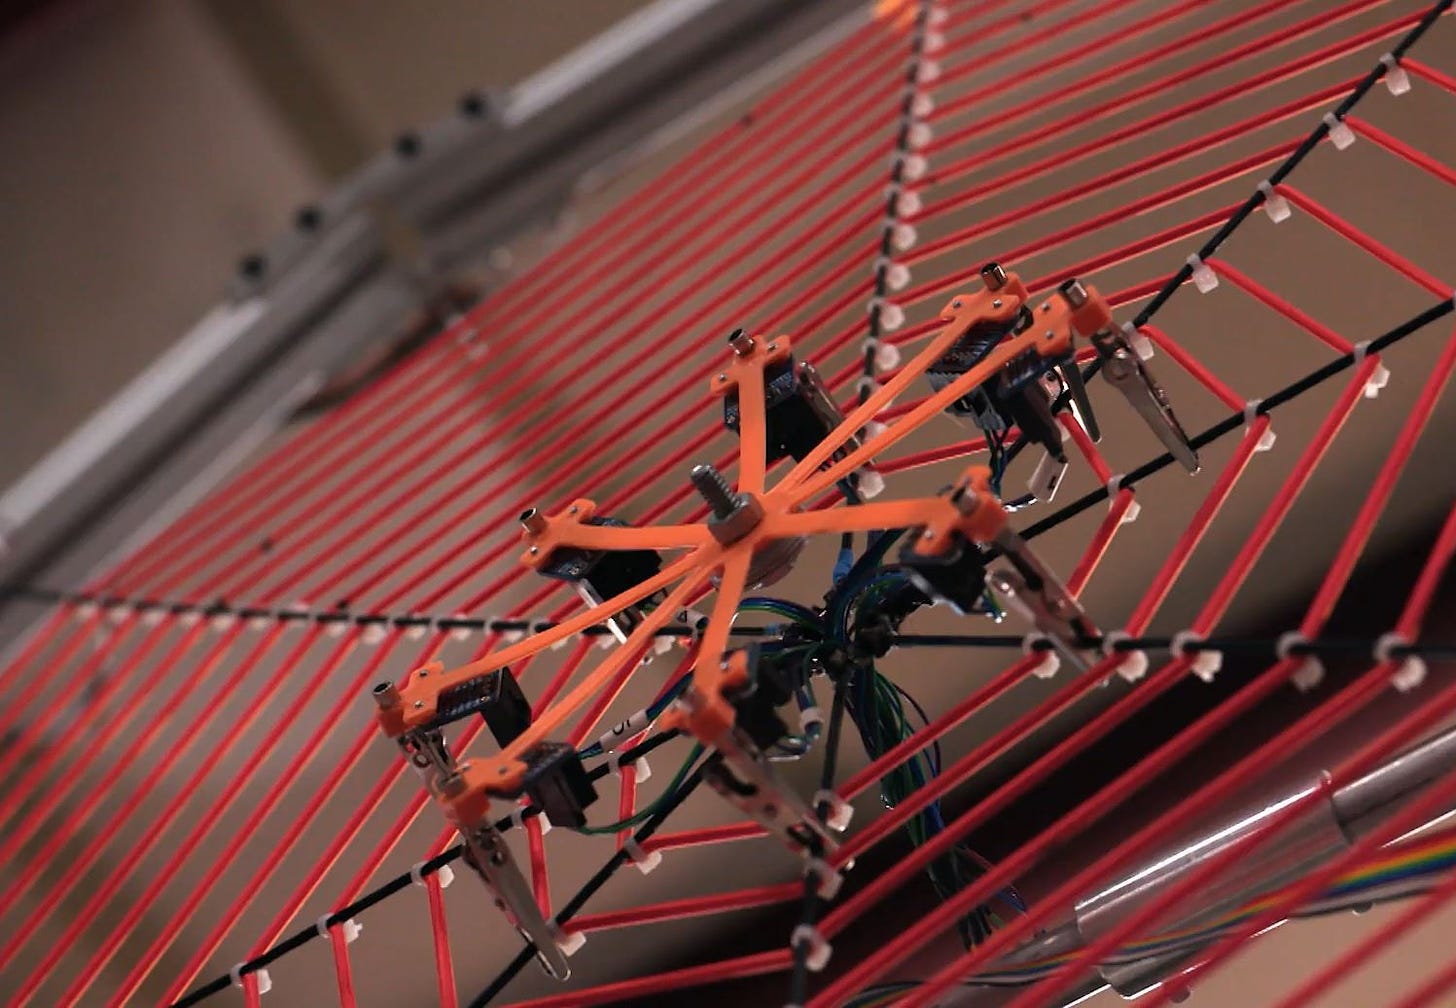 SpiderHarp: Oregon scientists study spiders with a web-inspired musical  instrument - OPB